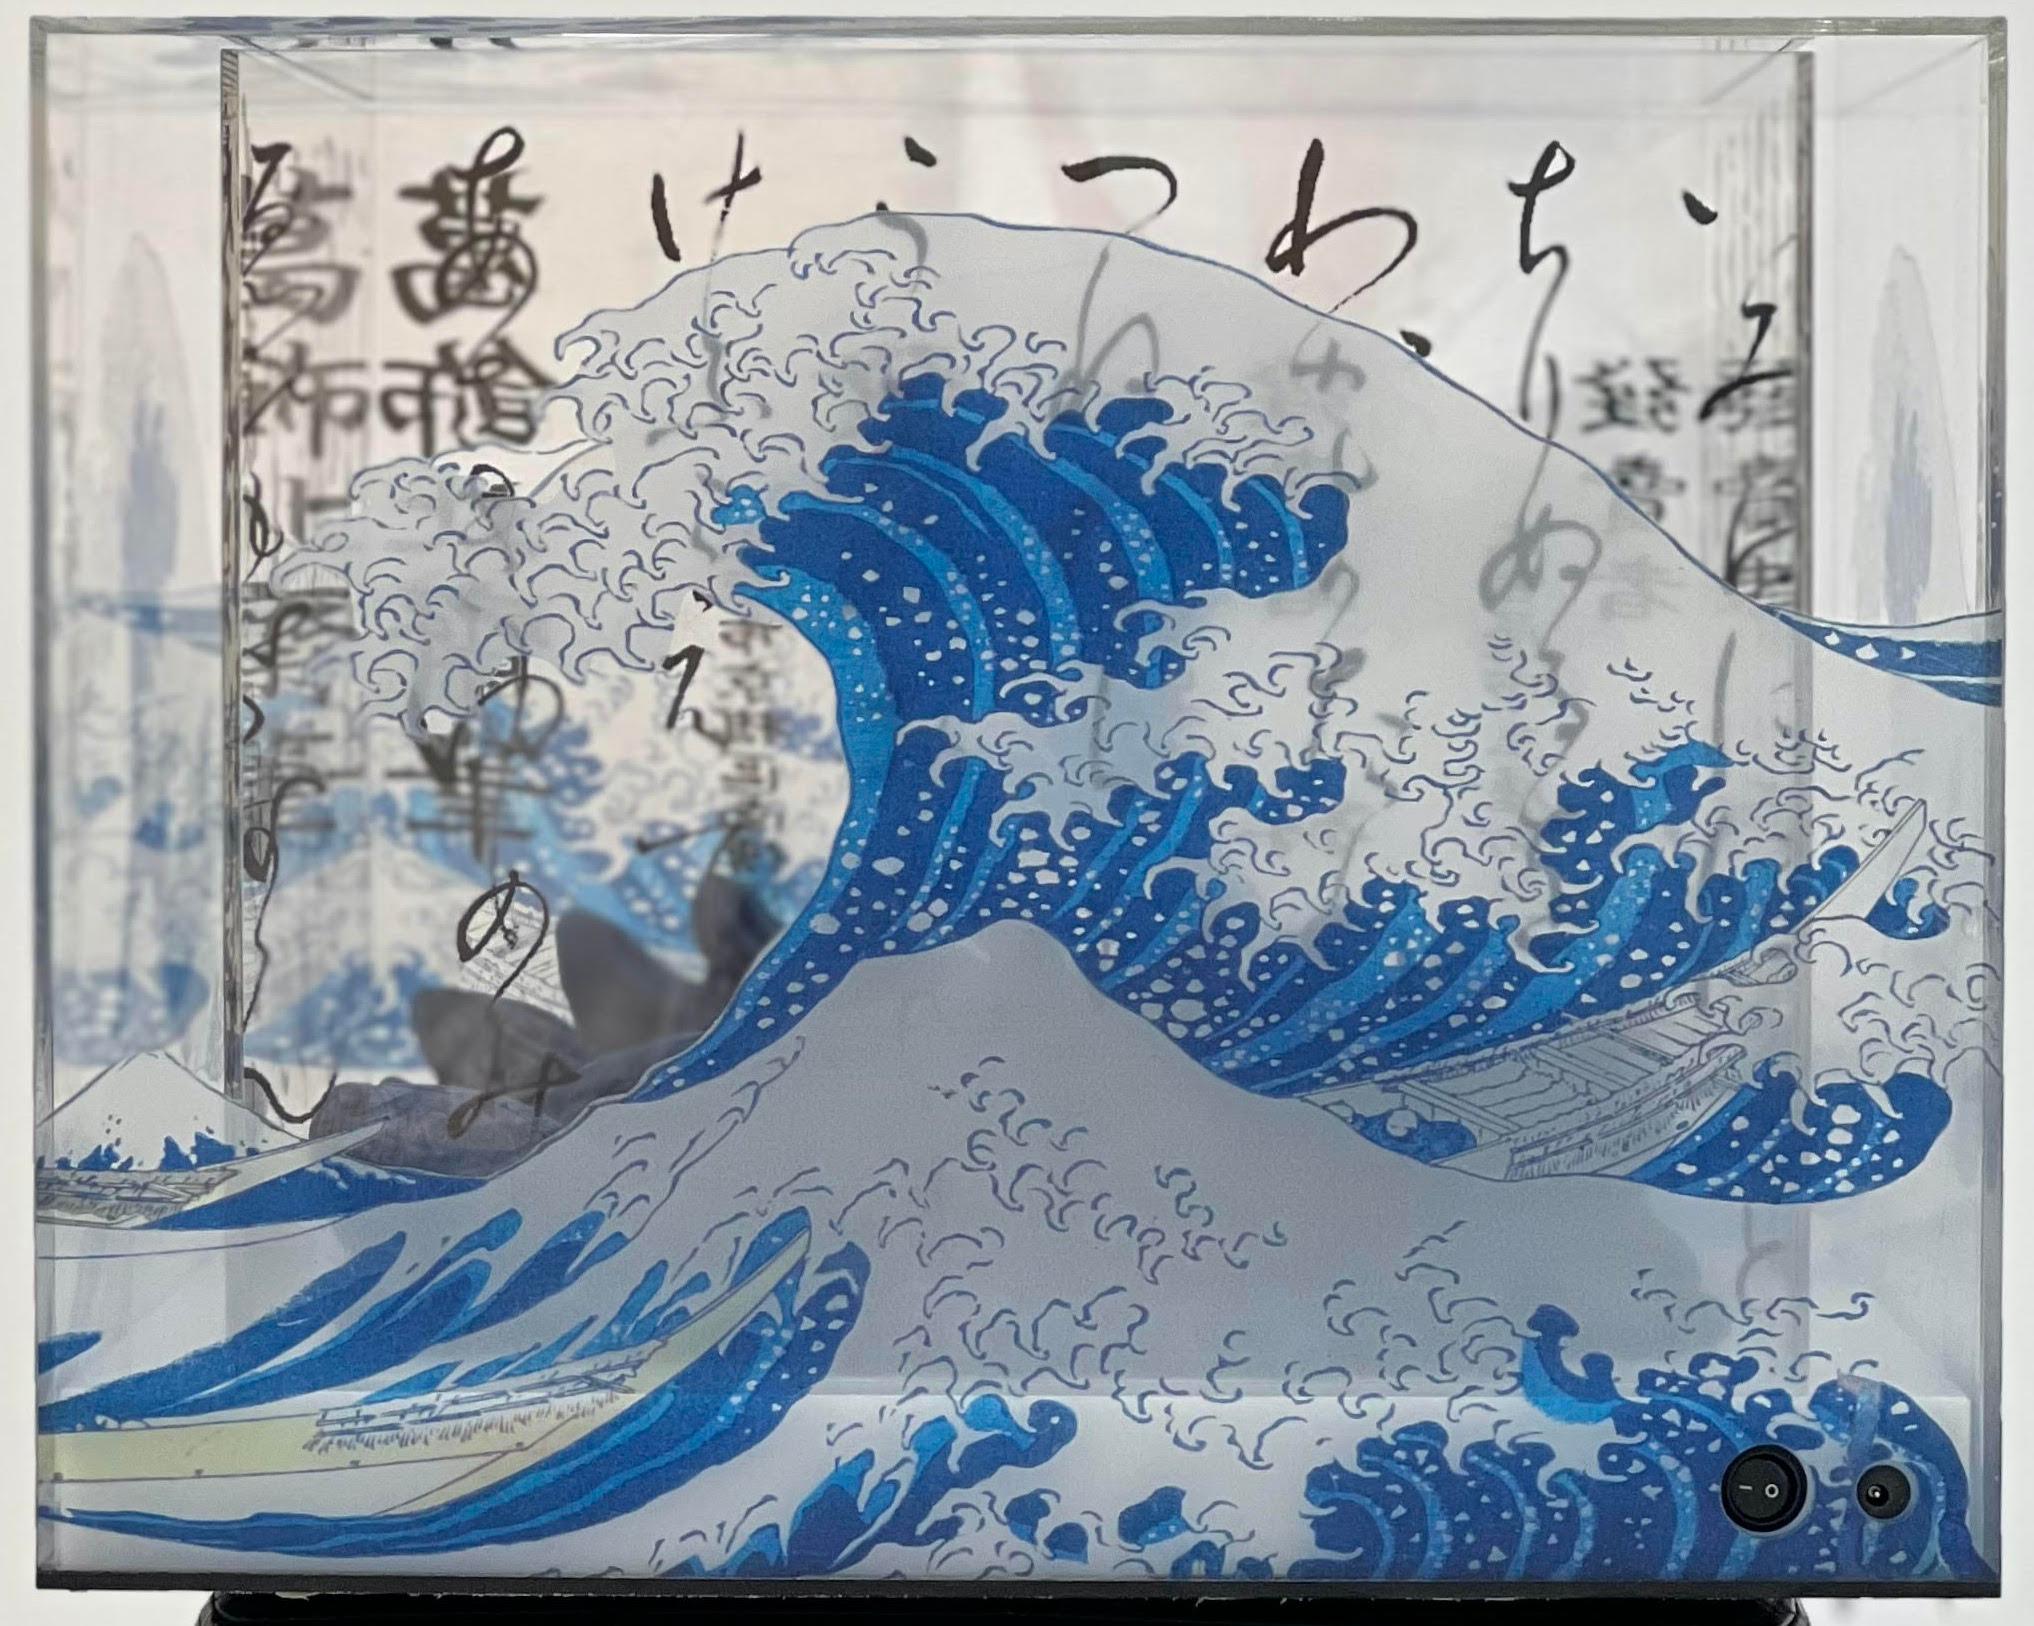 Jan 2021, unique edition
Mix media resin with pigment polychrome under plexygas cap with LED
15 7/10 × 19 7/10 × 19 7/10 in - 40 × 50 × 50 cm
The artwork is signed by the Artist , carved with edition number and date on a plate under the piece
The